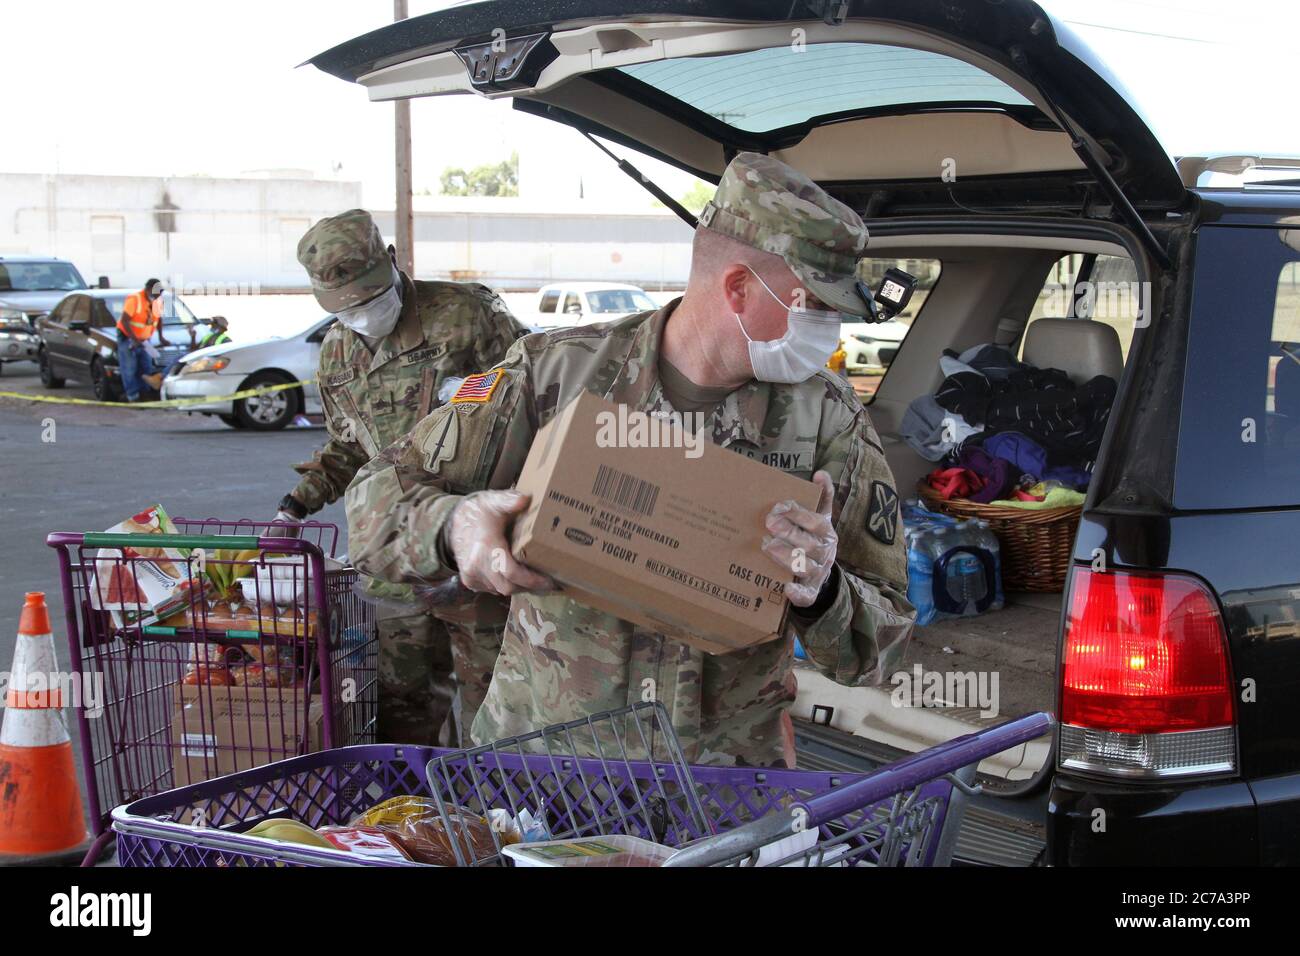 California National Guard soldiers load boxes of food for to assist families in response to COVID-19, coronavirus pandemic at the Stockton/San Joaquin Emergency Food Bank June 26, 2020 in Stockton, California. Stock Photo